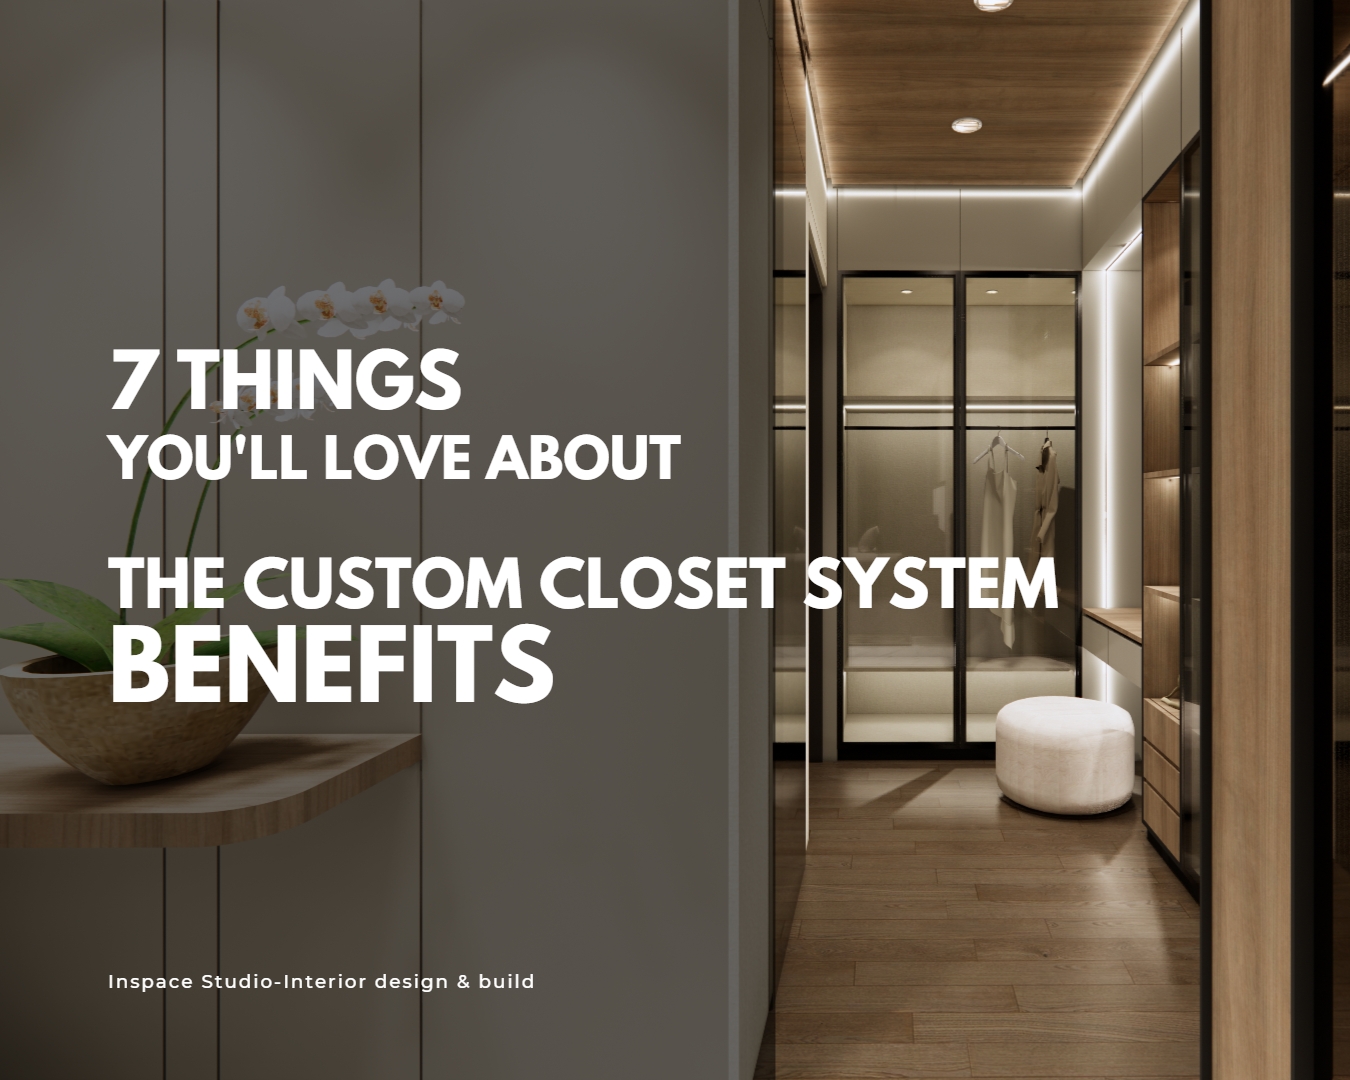 Things you’ll love about the custom closet system benefits